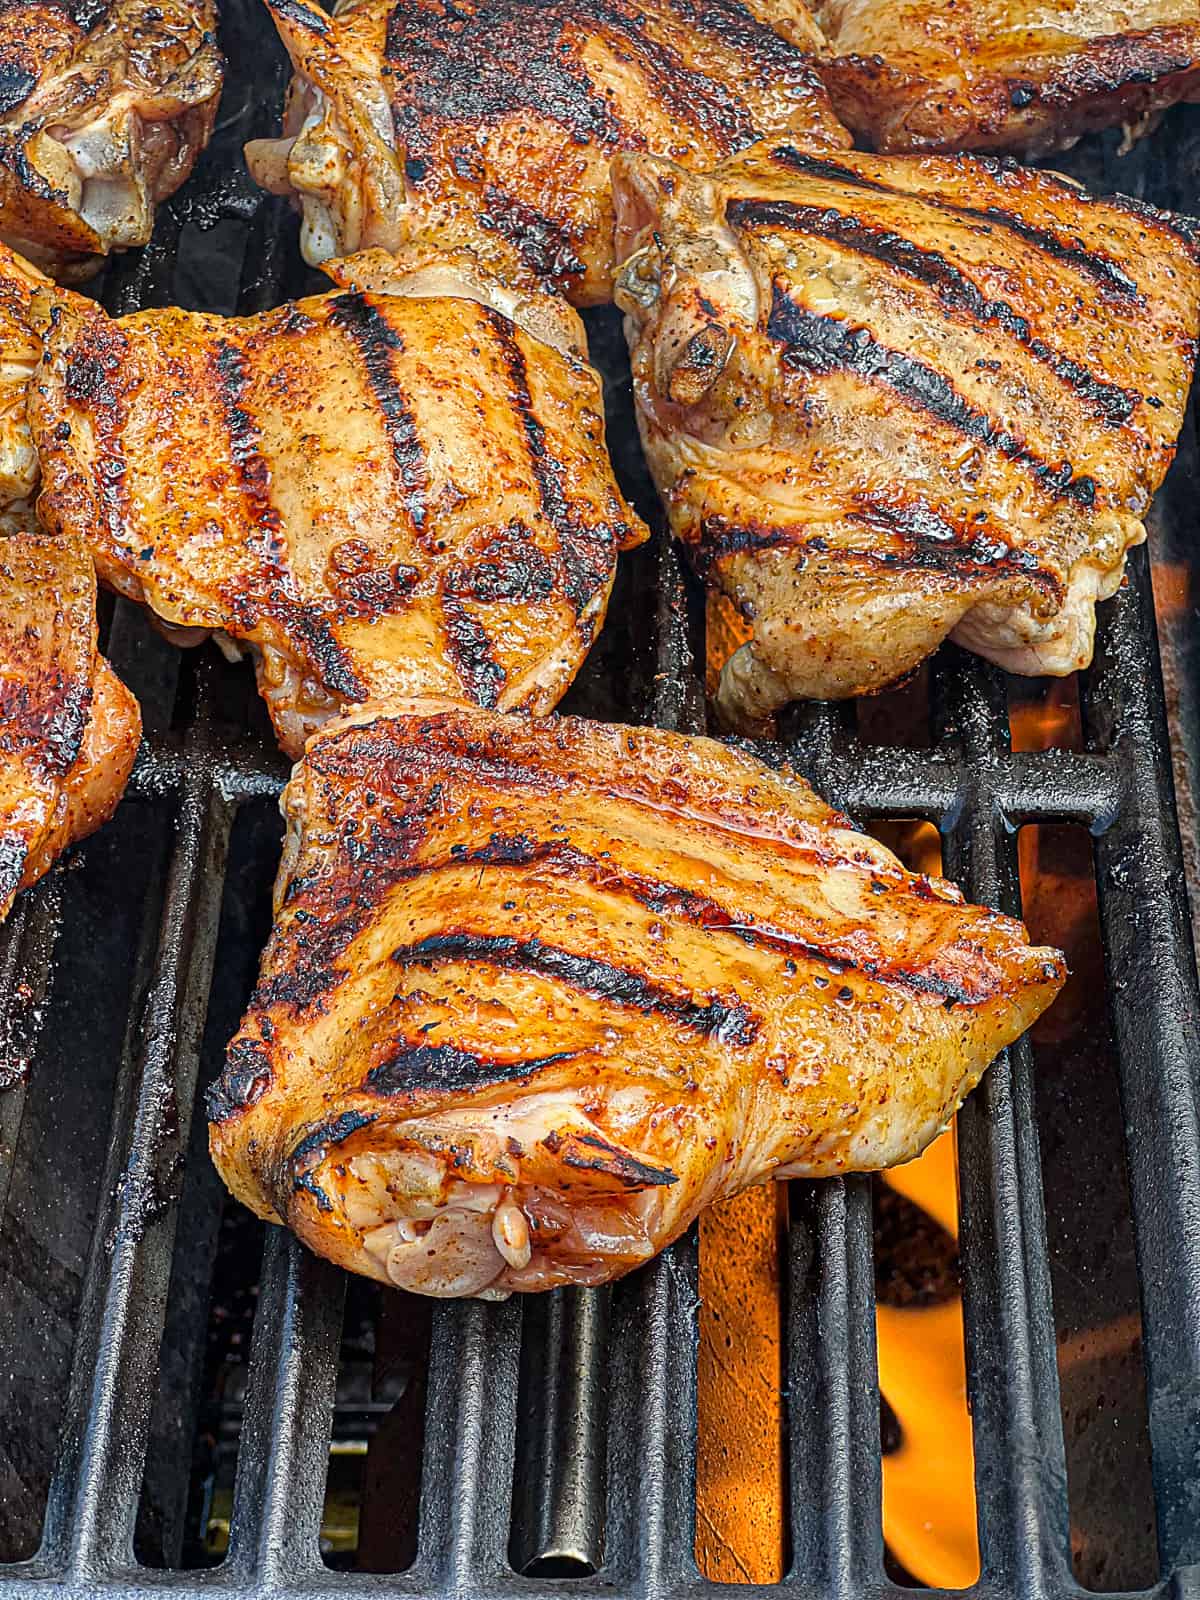 BBQ Grilled Chicken Thighs with skin on and grill marks